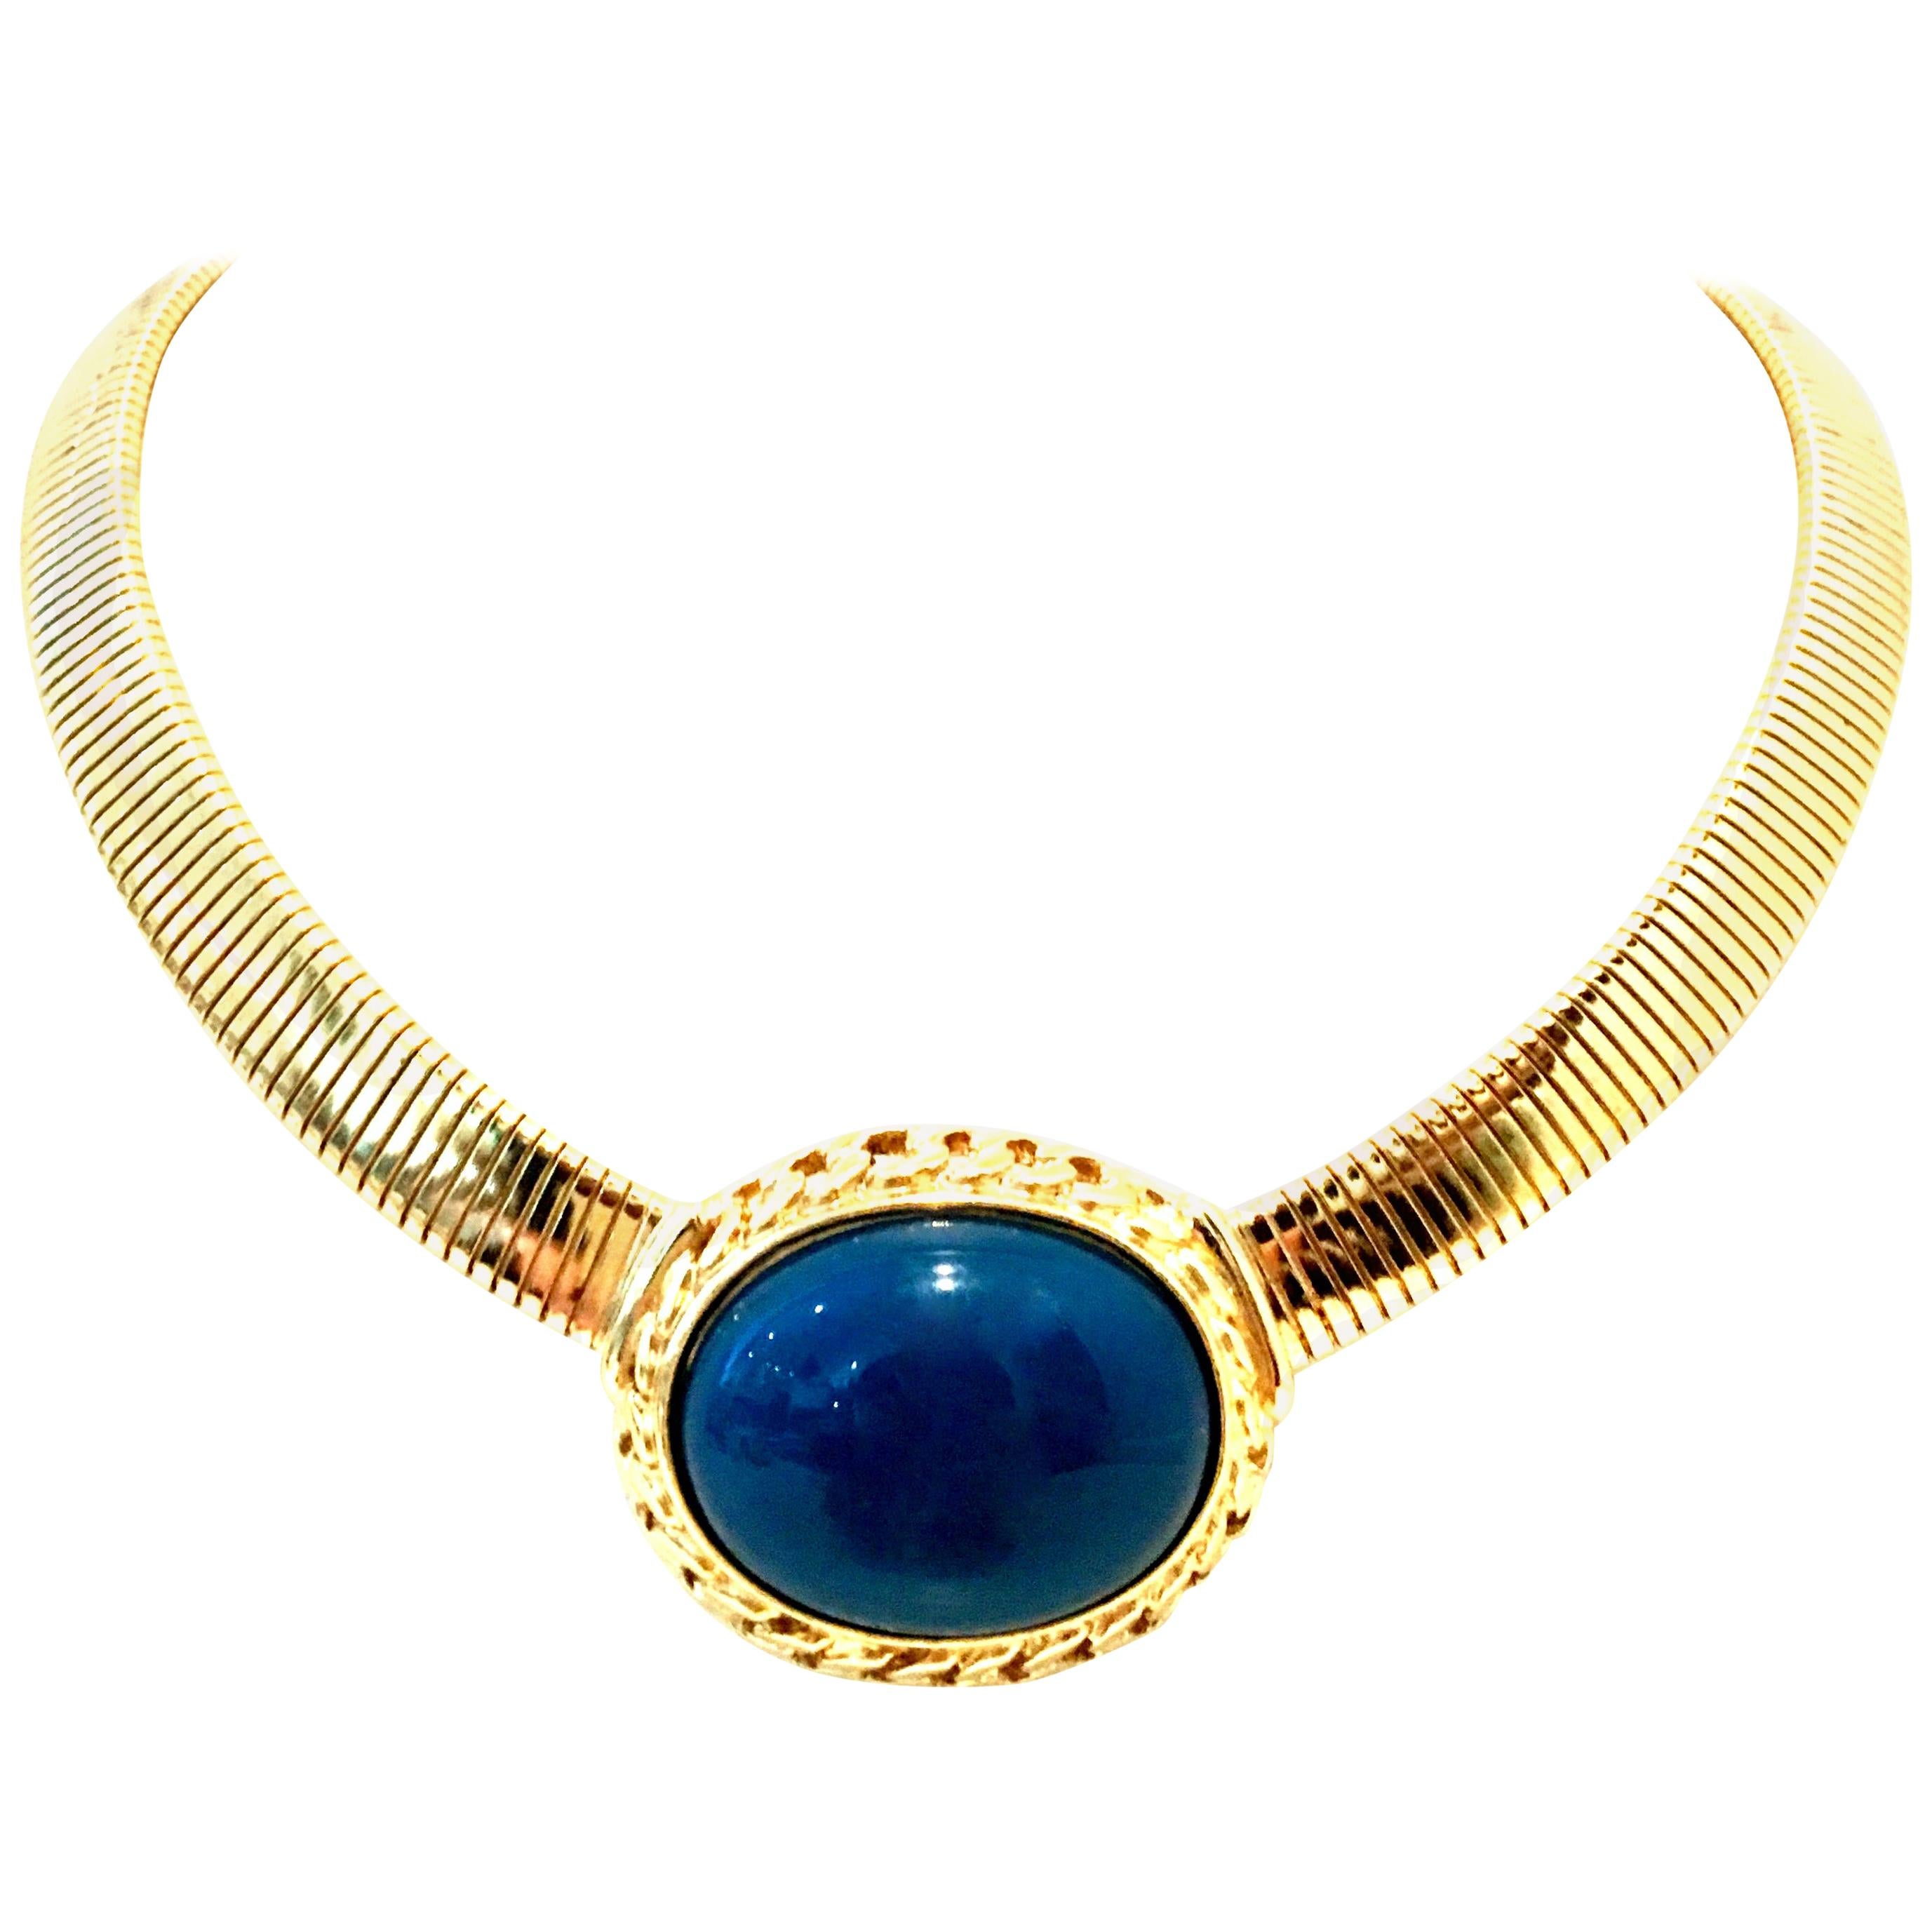 20th Century Gold Plate & Faux Blue Lapis Omega Choker Necklace By, Trifari For Sale